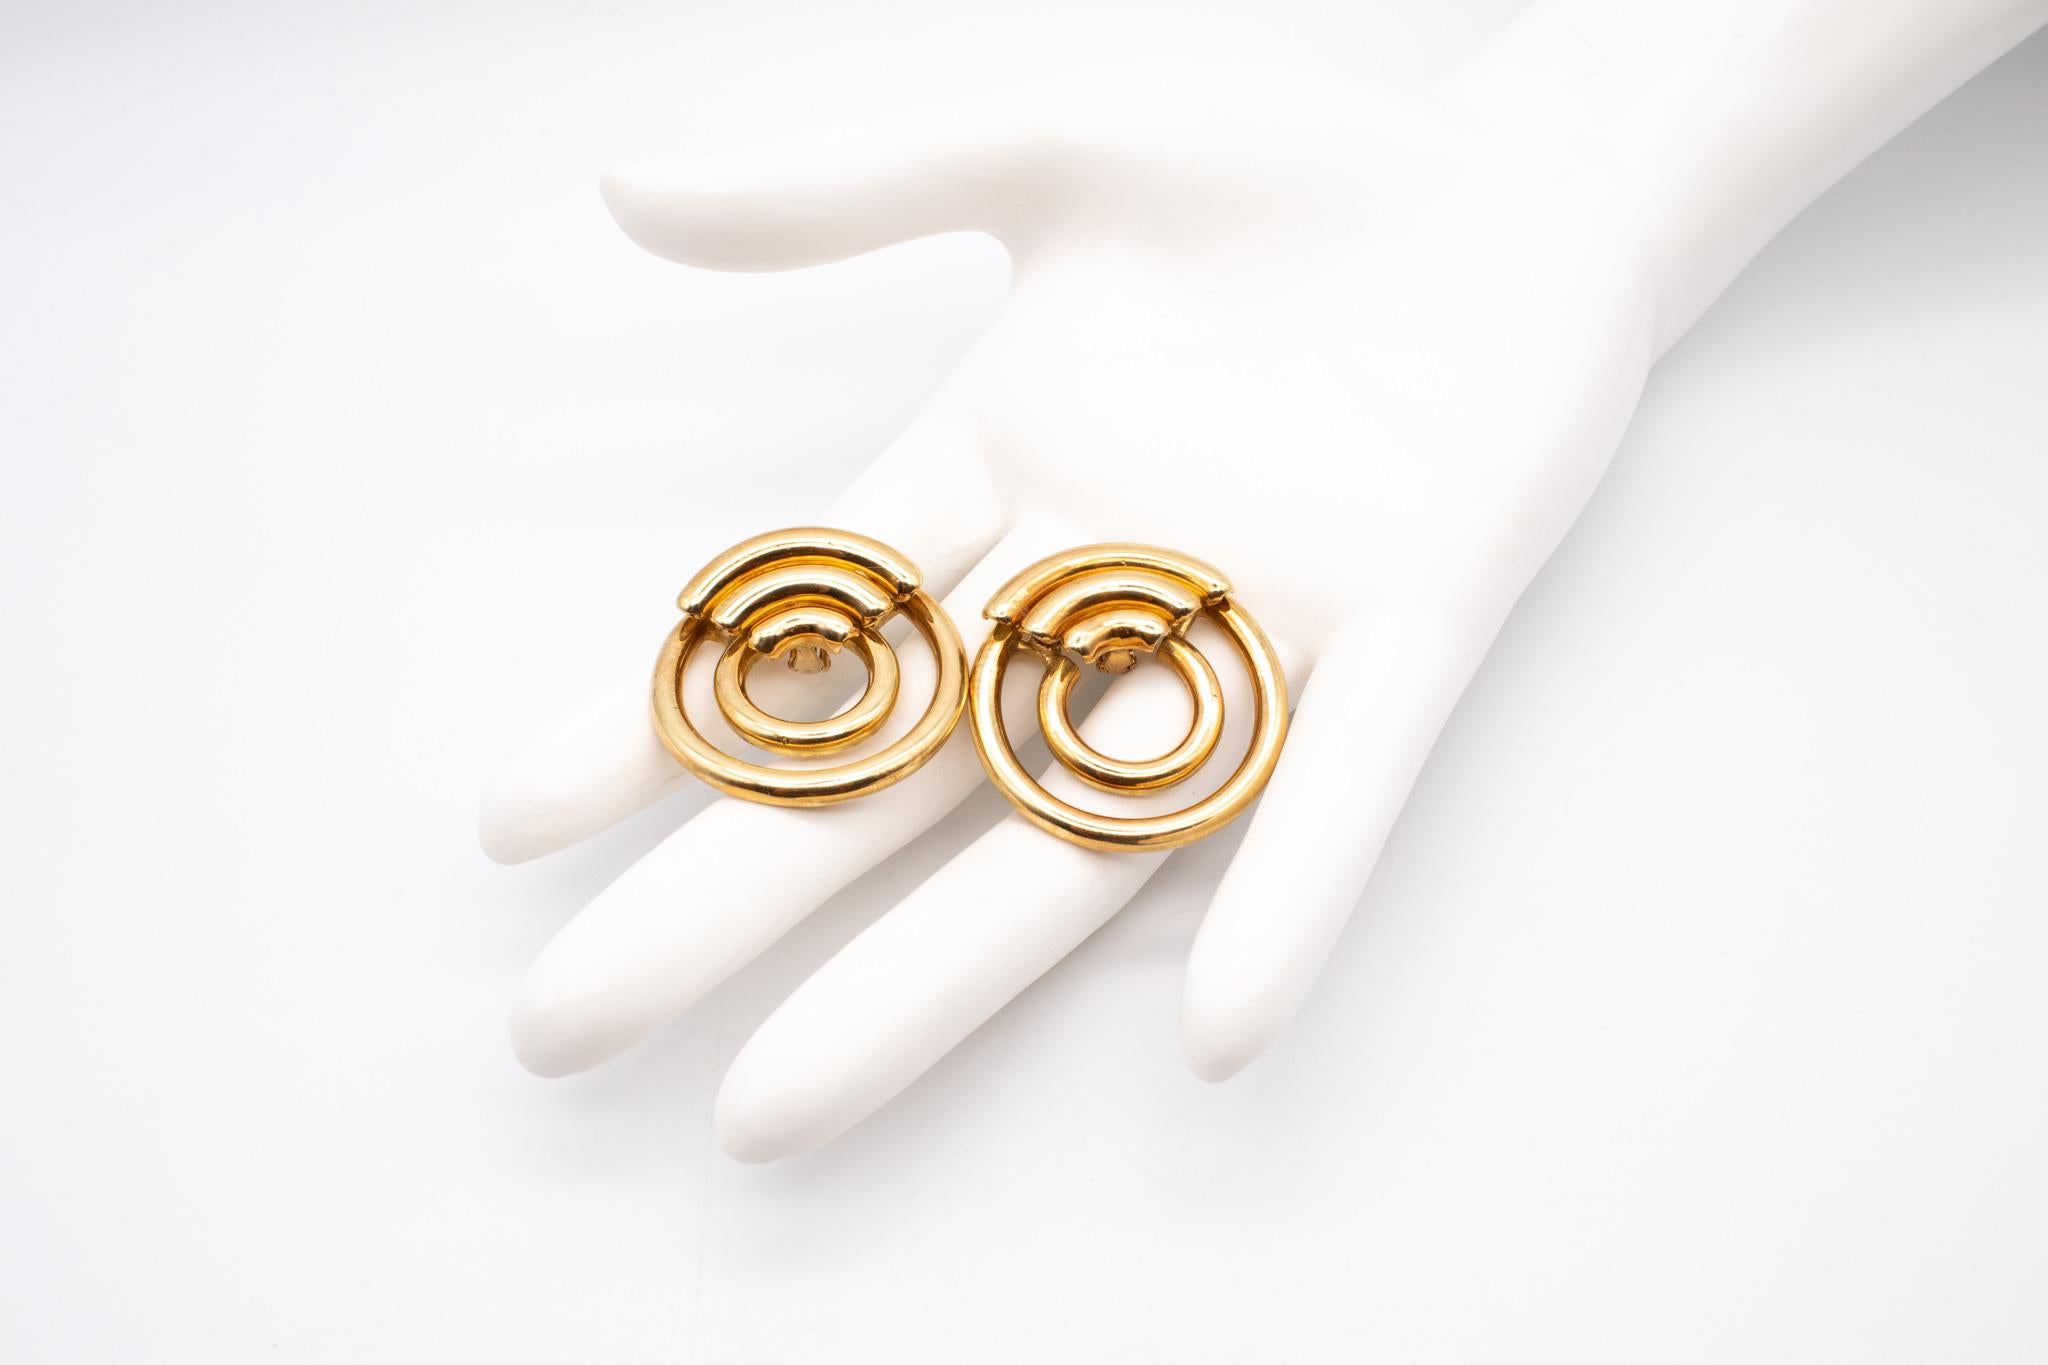 Modernist Cartier 1972 Aldo Cipullo Geometric Circled Large Earrings in Solid 18Kt Gold